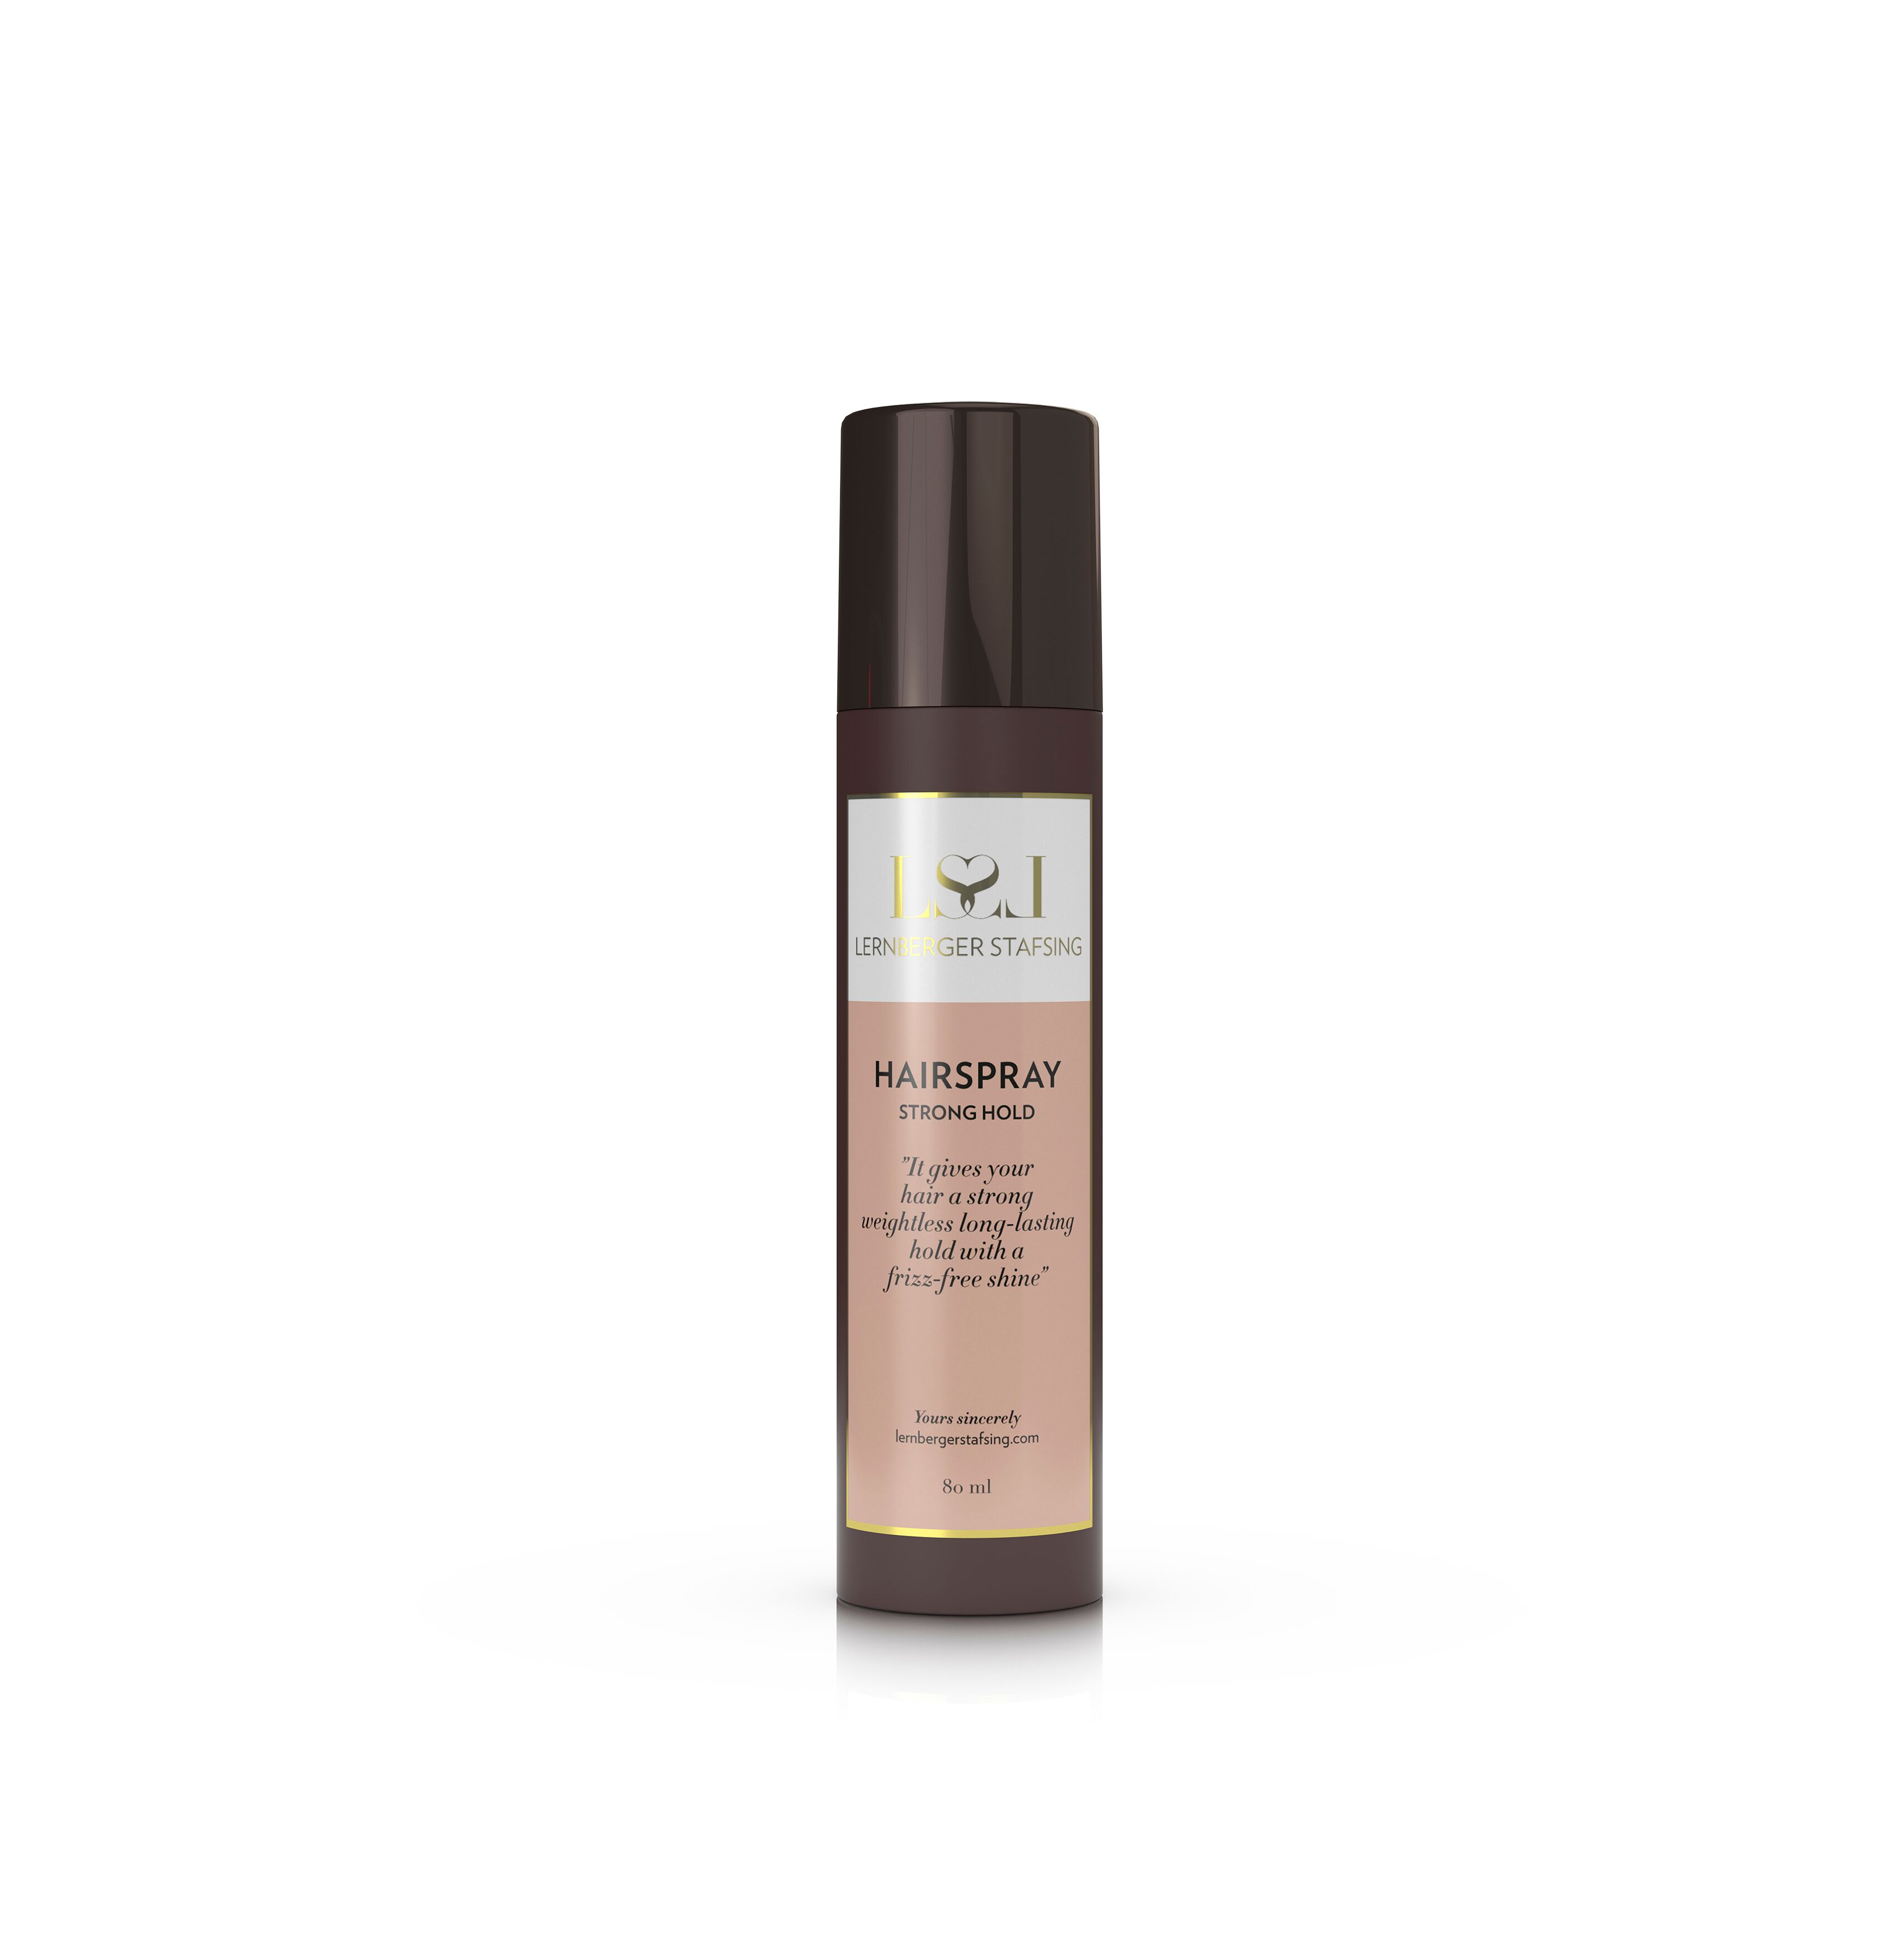 Hairspray Strong Hold Travel Size